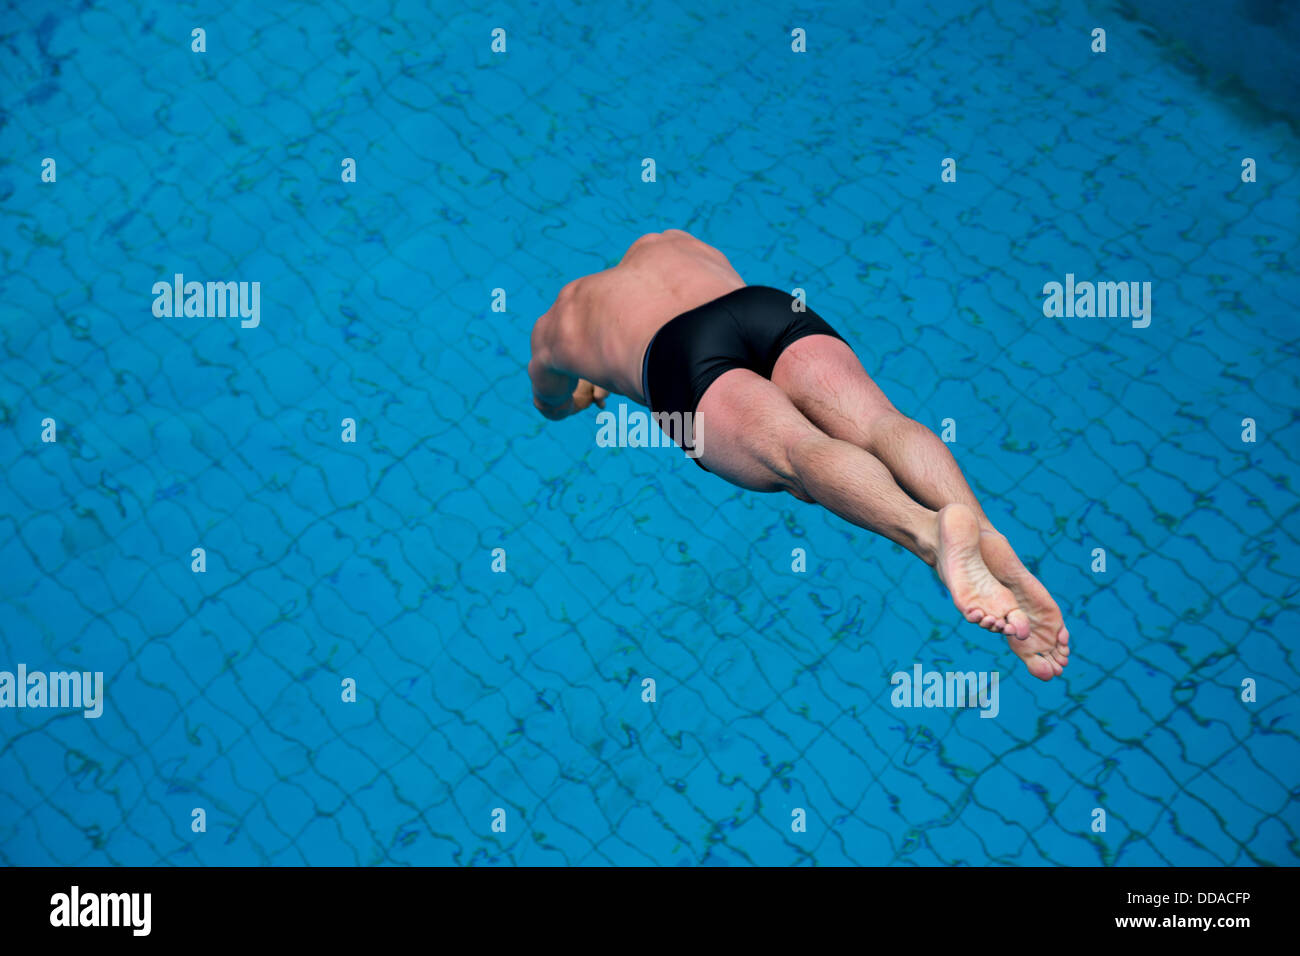 Man jumping from diving board at public swimming pool Stock Photo